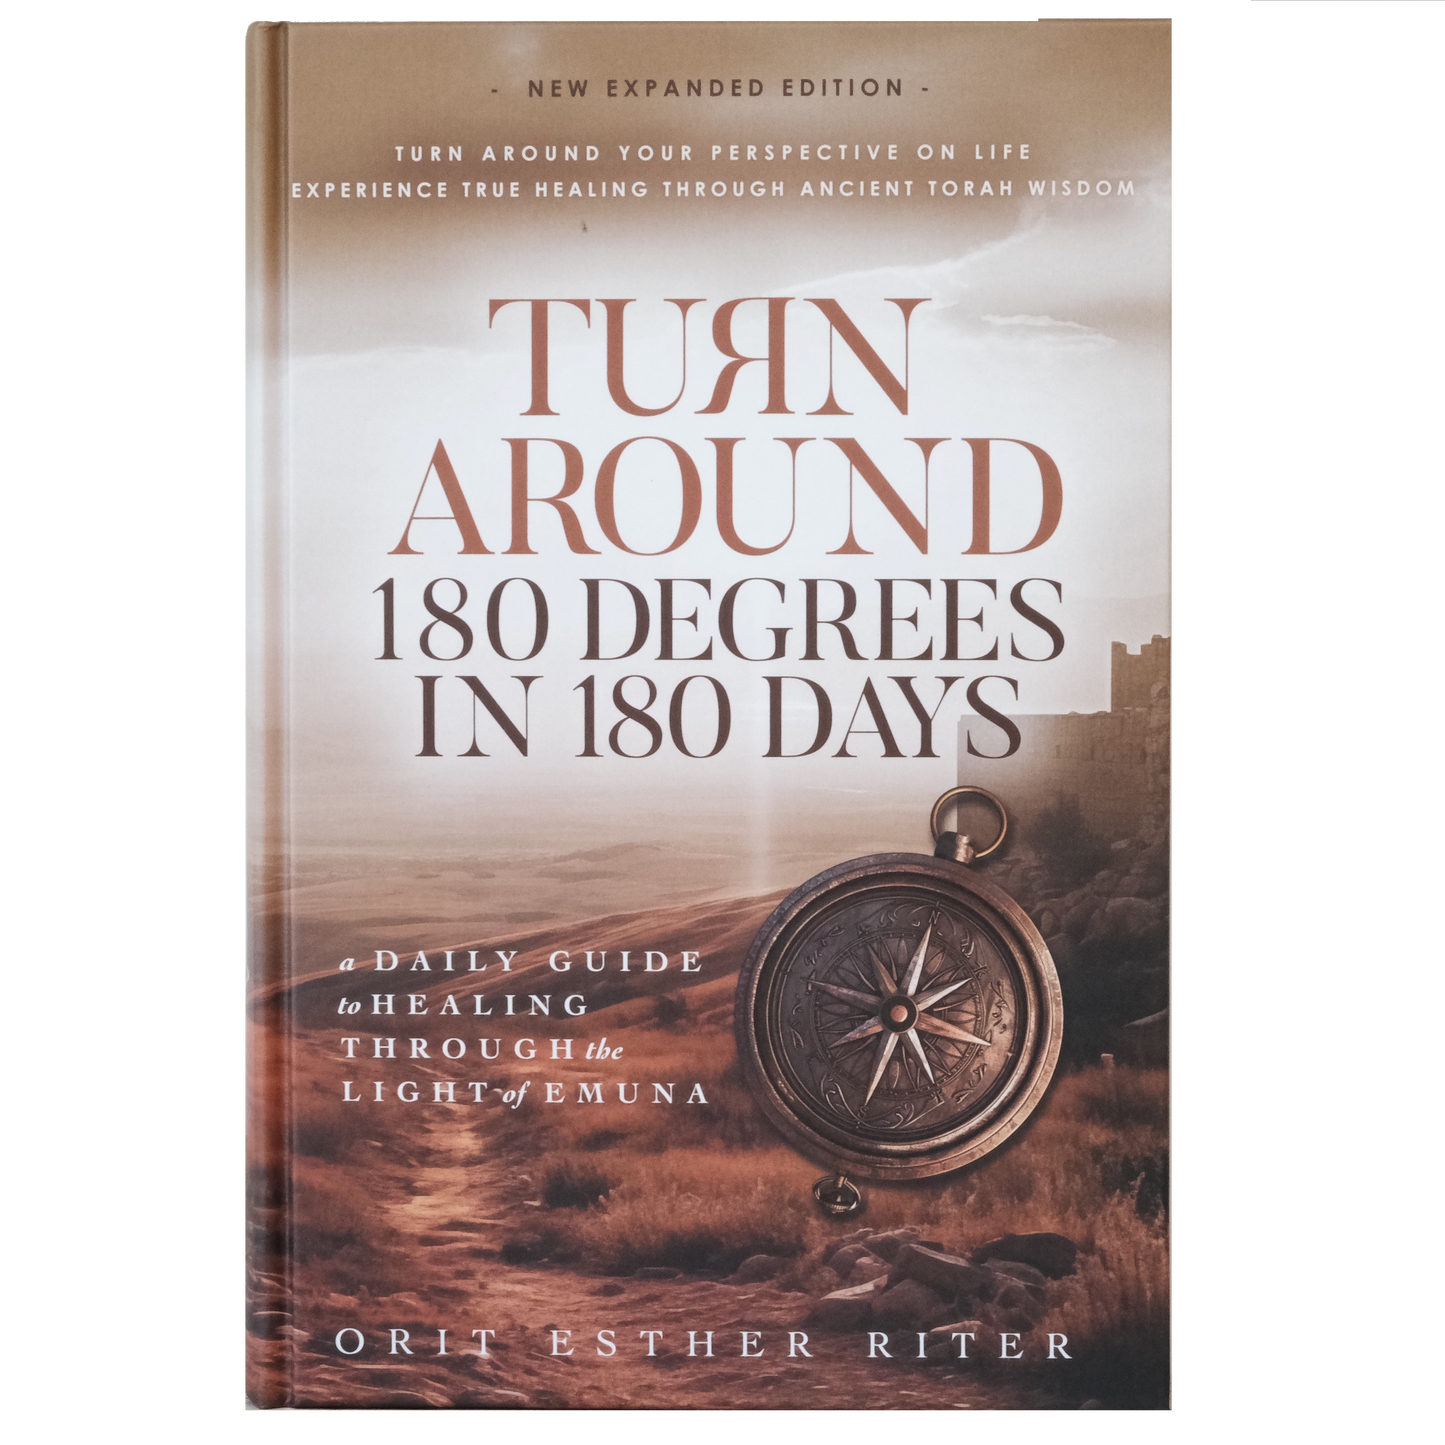 Turn Around 180 Degrees in 180 Days Book by Orit Esther Riter